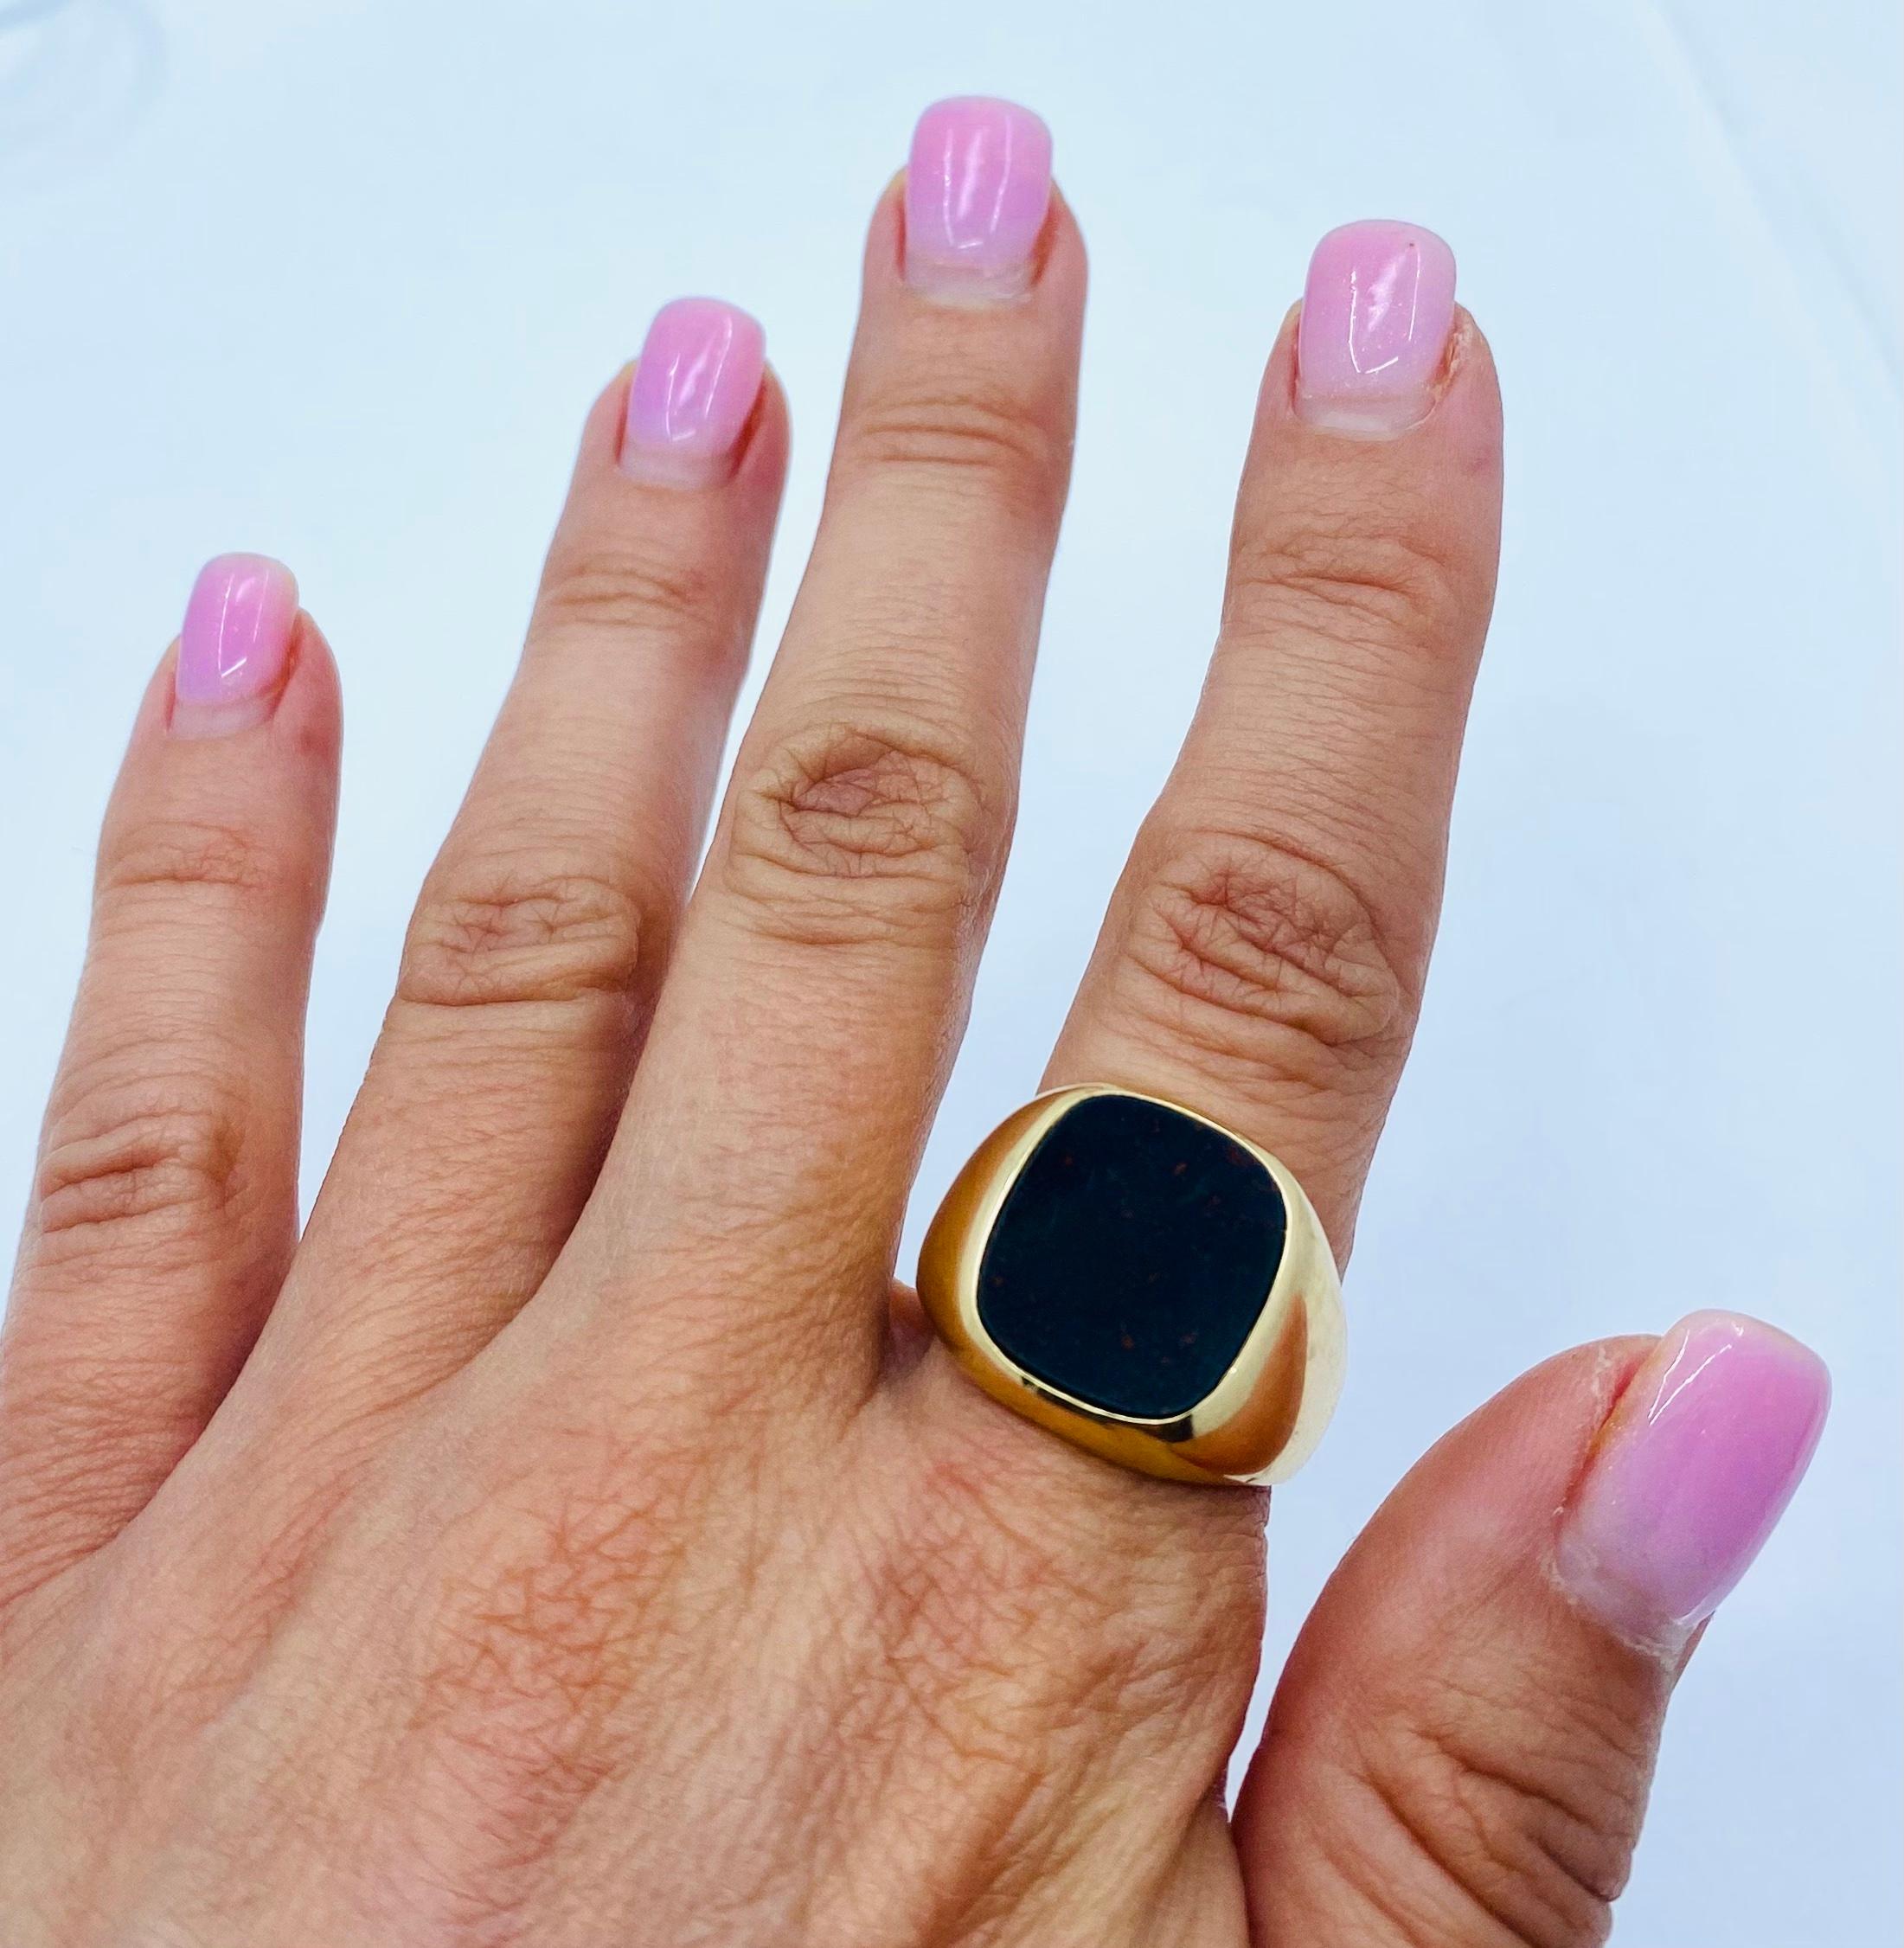 Designer: Tiffany & Co.
Materials: 14 karat Yellow Gold
Weight: 17.1 grams
Gemstone:  Bloodstone
Ring Size: 10.5
Hallmarks: Tiffany, 14K

A Tiffany & Co. 14k gold signet ring features bloodstone. It’s a classic gold Tiffany signet ring, bold and